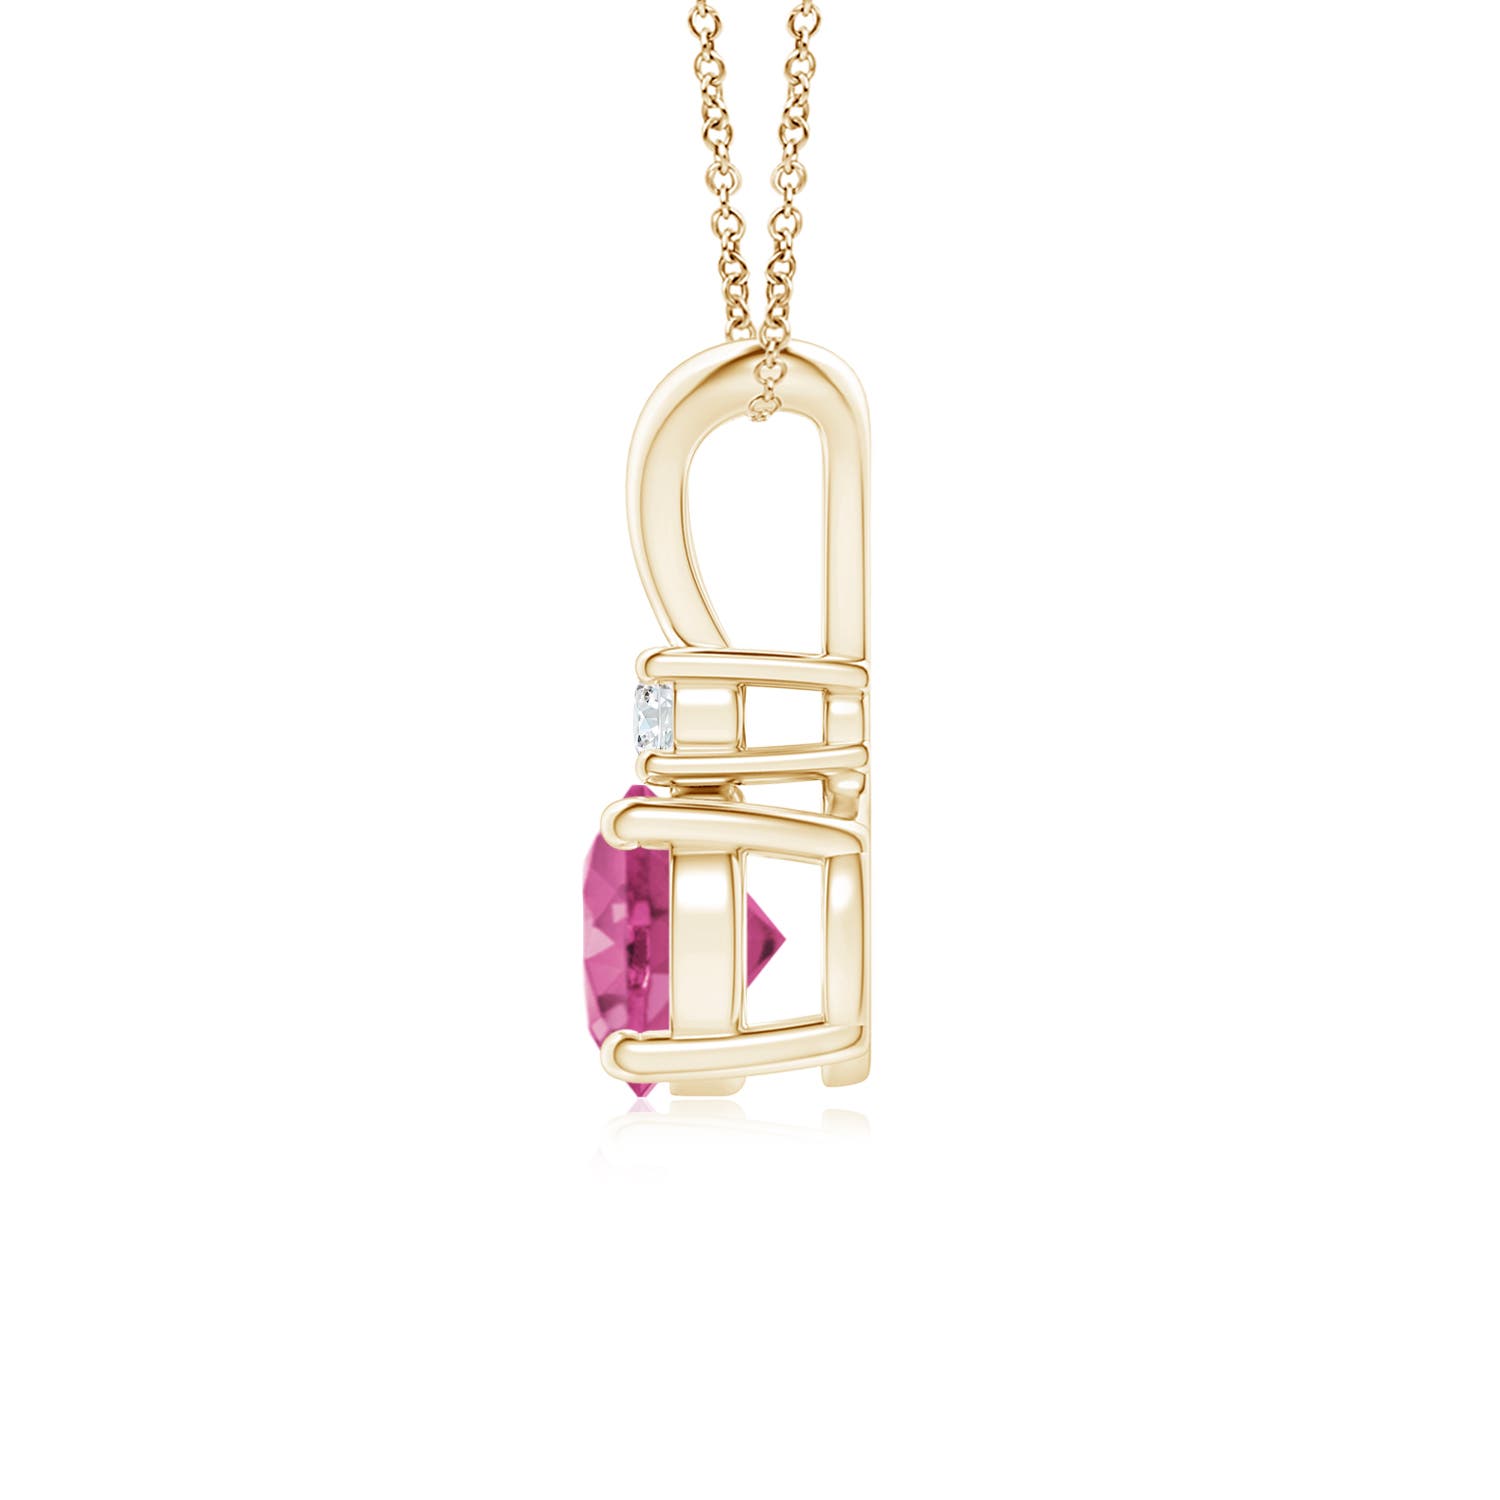 AAAA - Pink Sapphire / 1.04 CT / 14 KT Yellow Gold